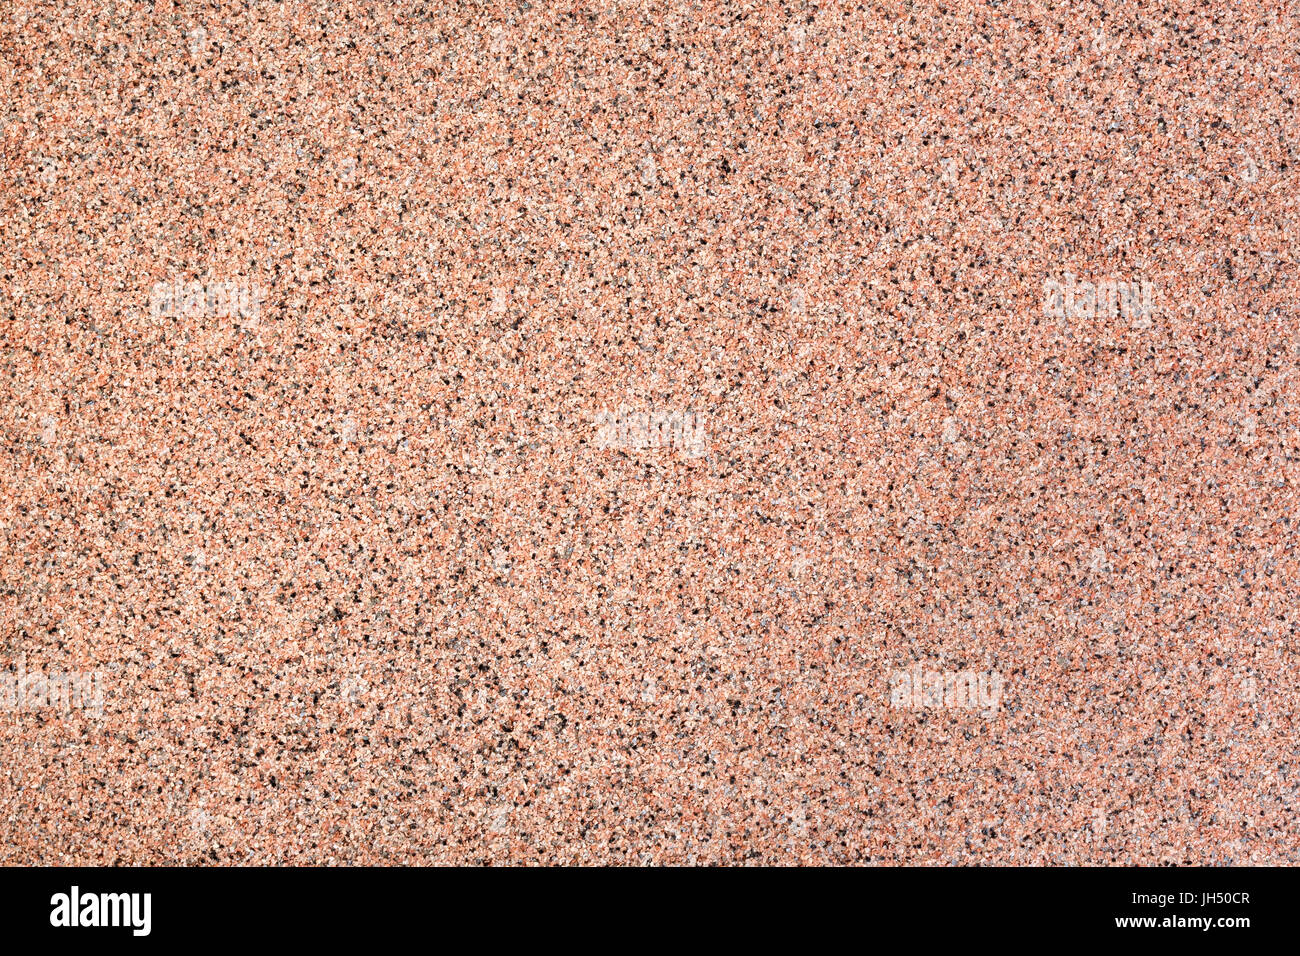 Background of red river sand. Sand texture. Stock Photo